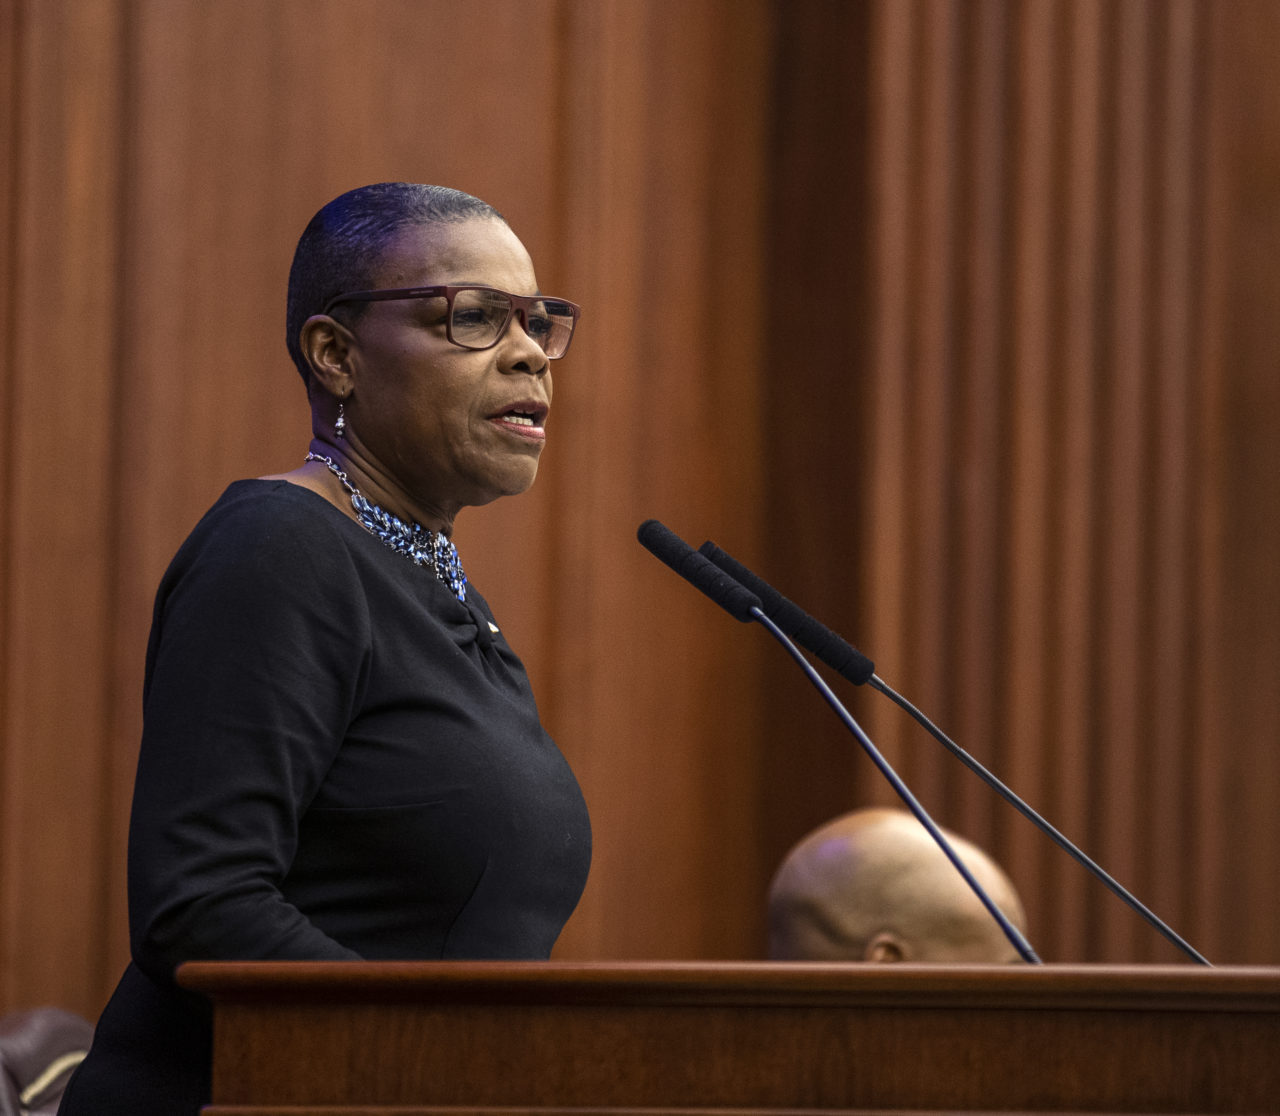 The Florida Senate Democratic caucus met to elect Sen. Audrey Gibson  (D-Jacksonville) as the Democratic leader during the 2019 and 2020 legislative sessions